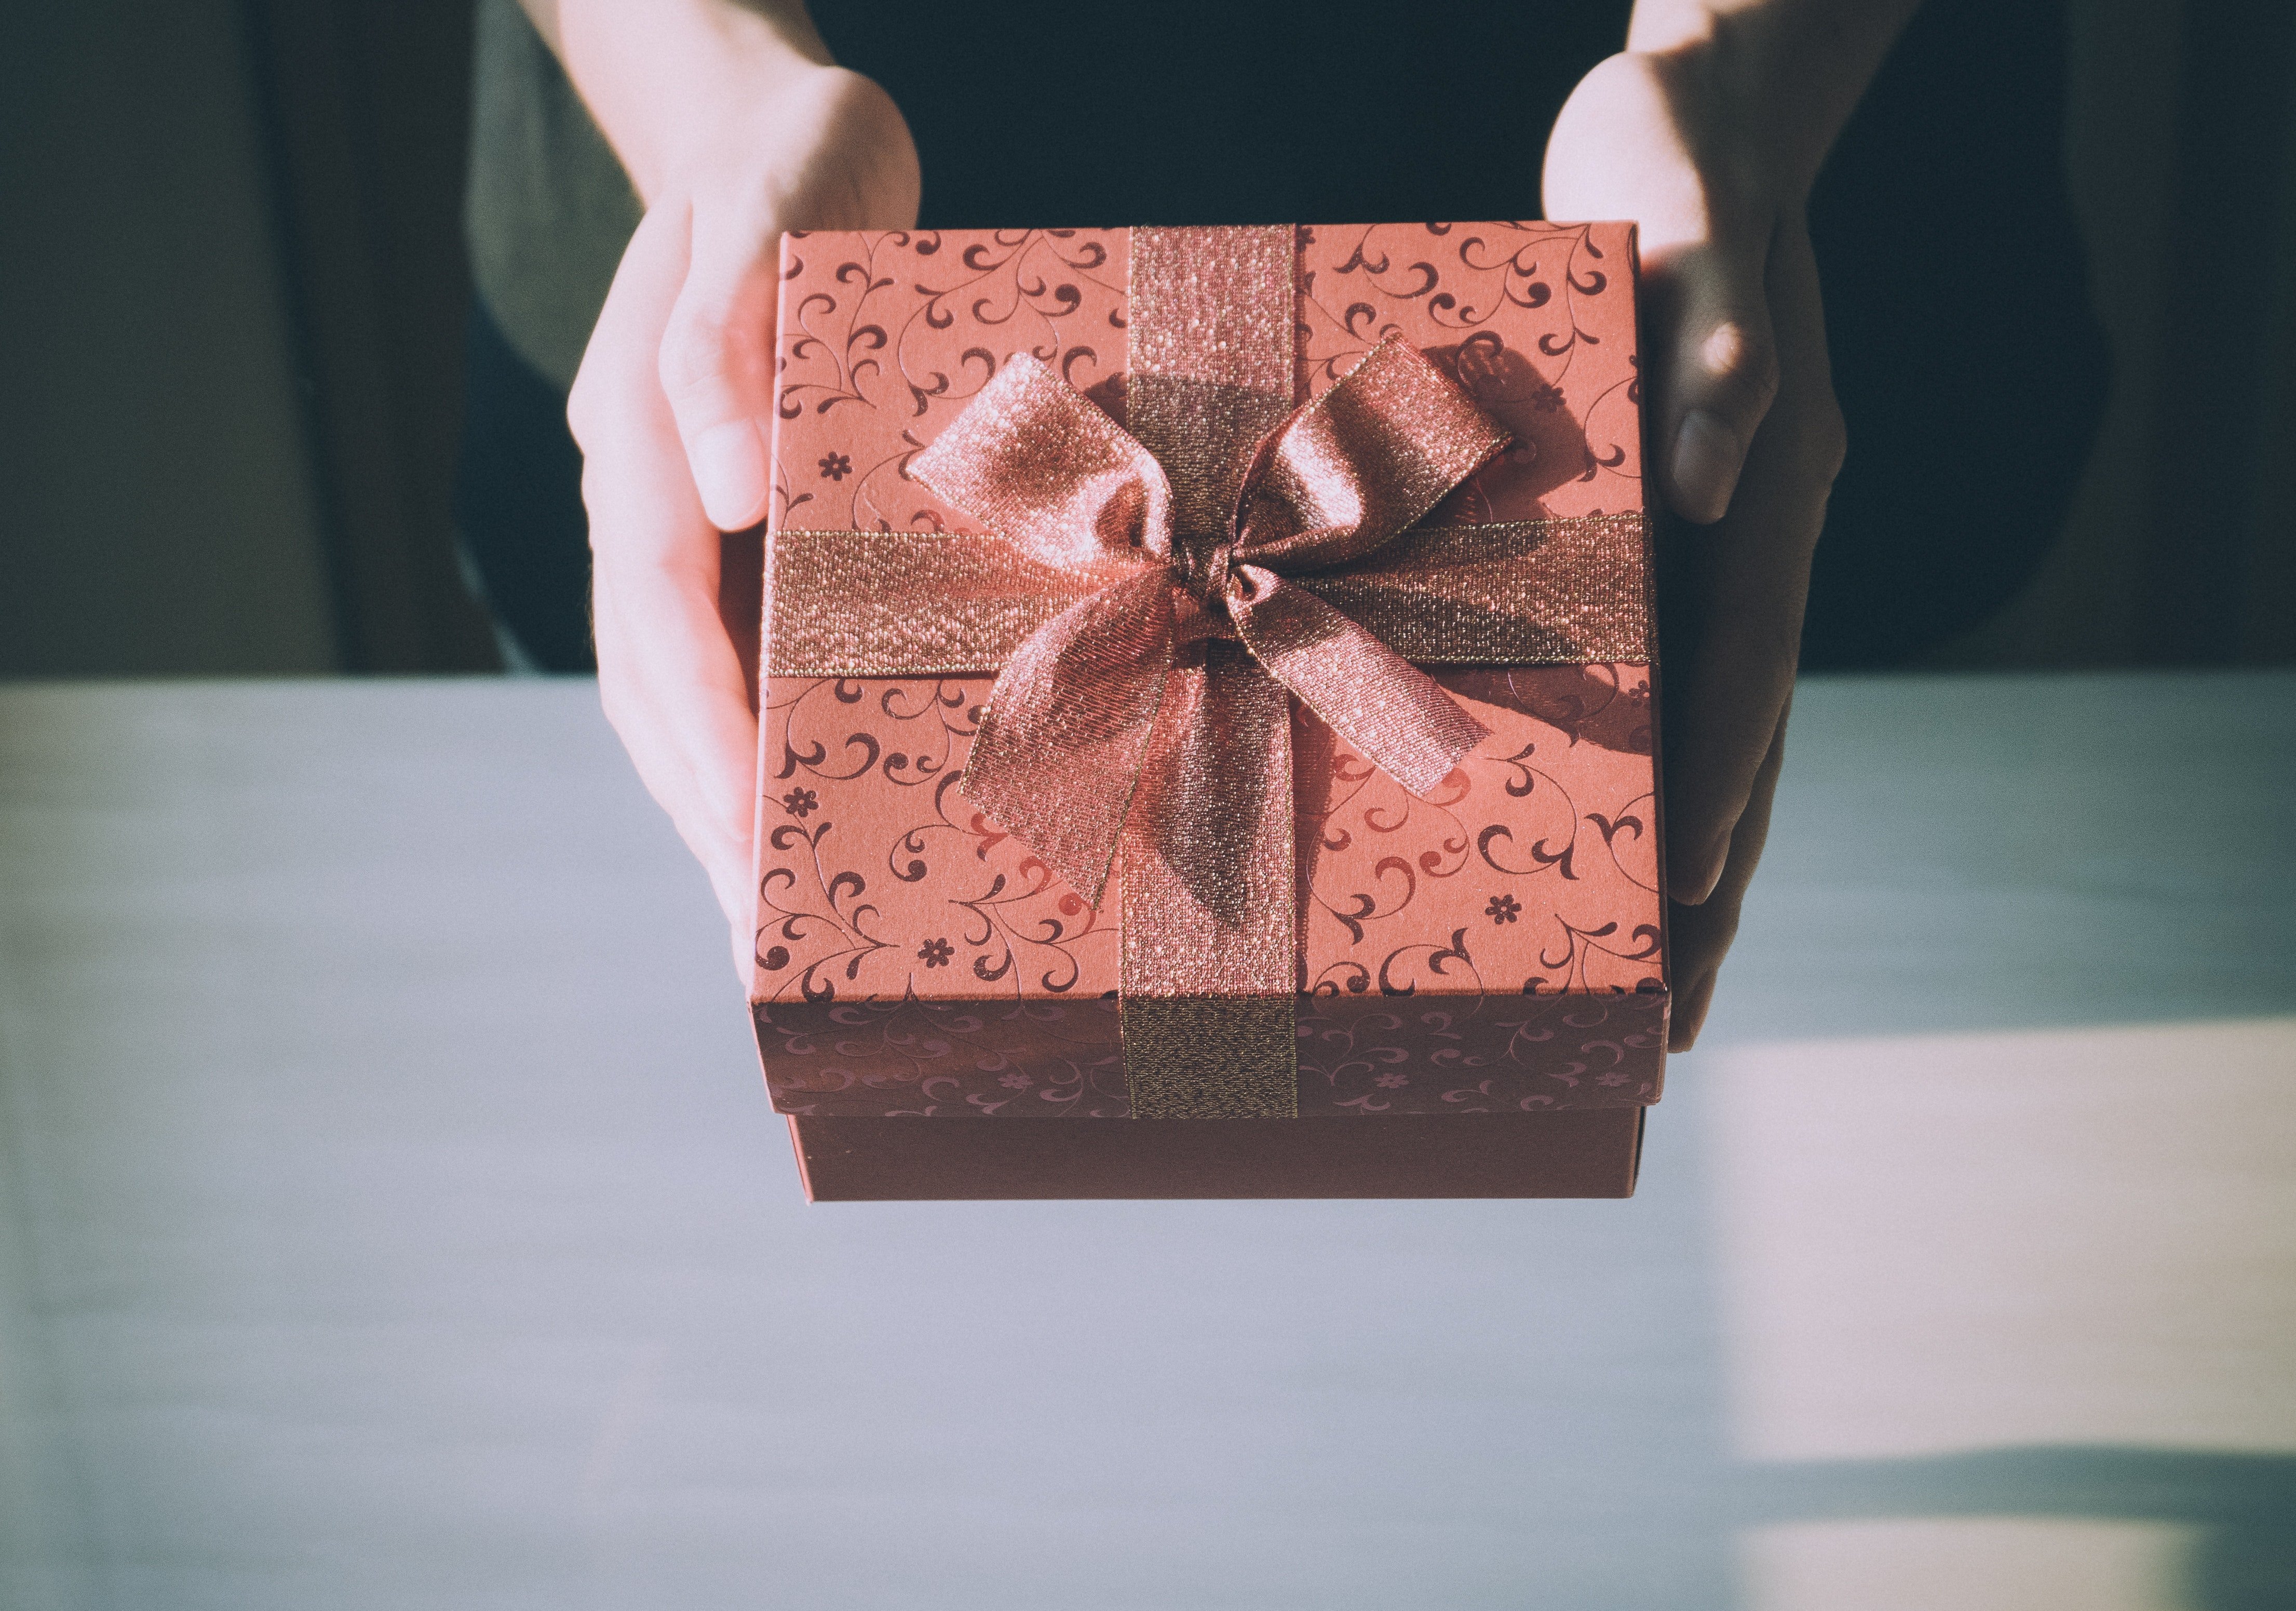 Helen handed Michael a small box for his birthday, disappointing him. | Source: Pexels